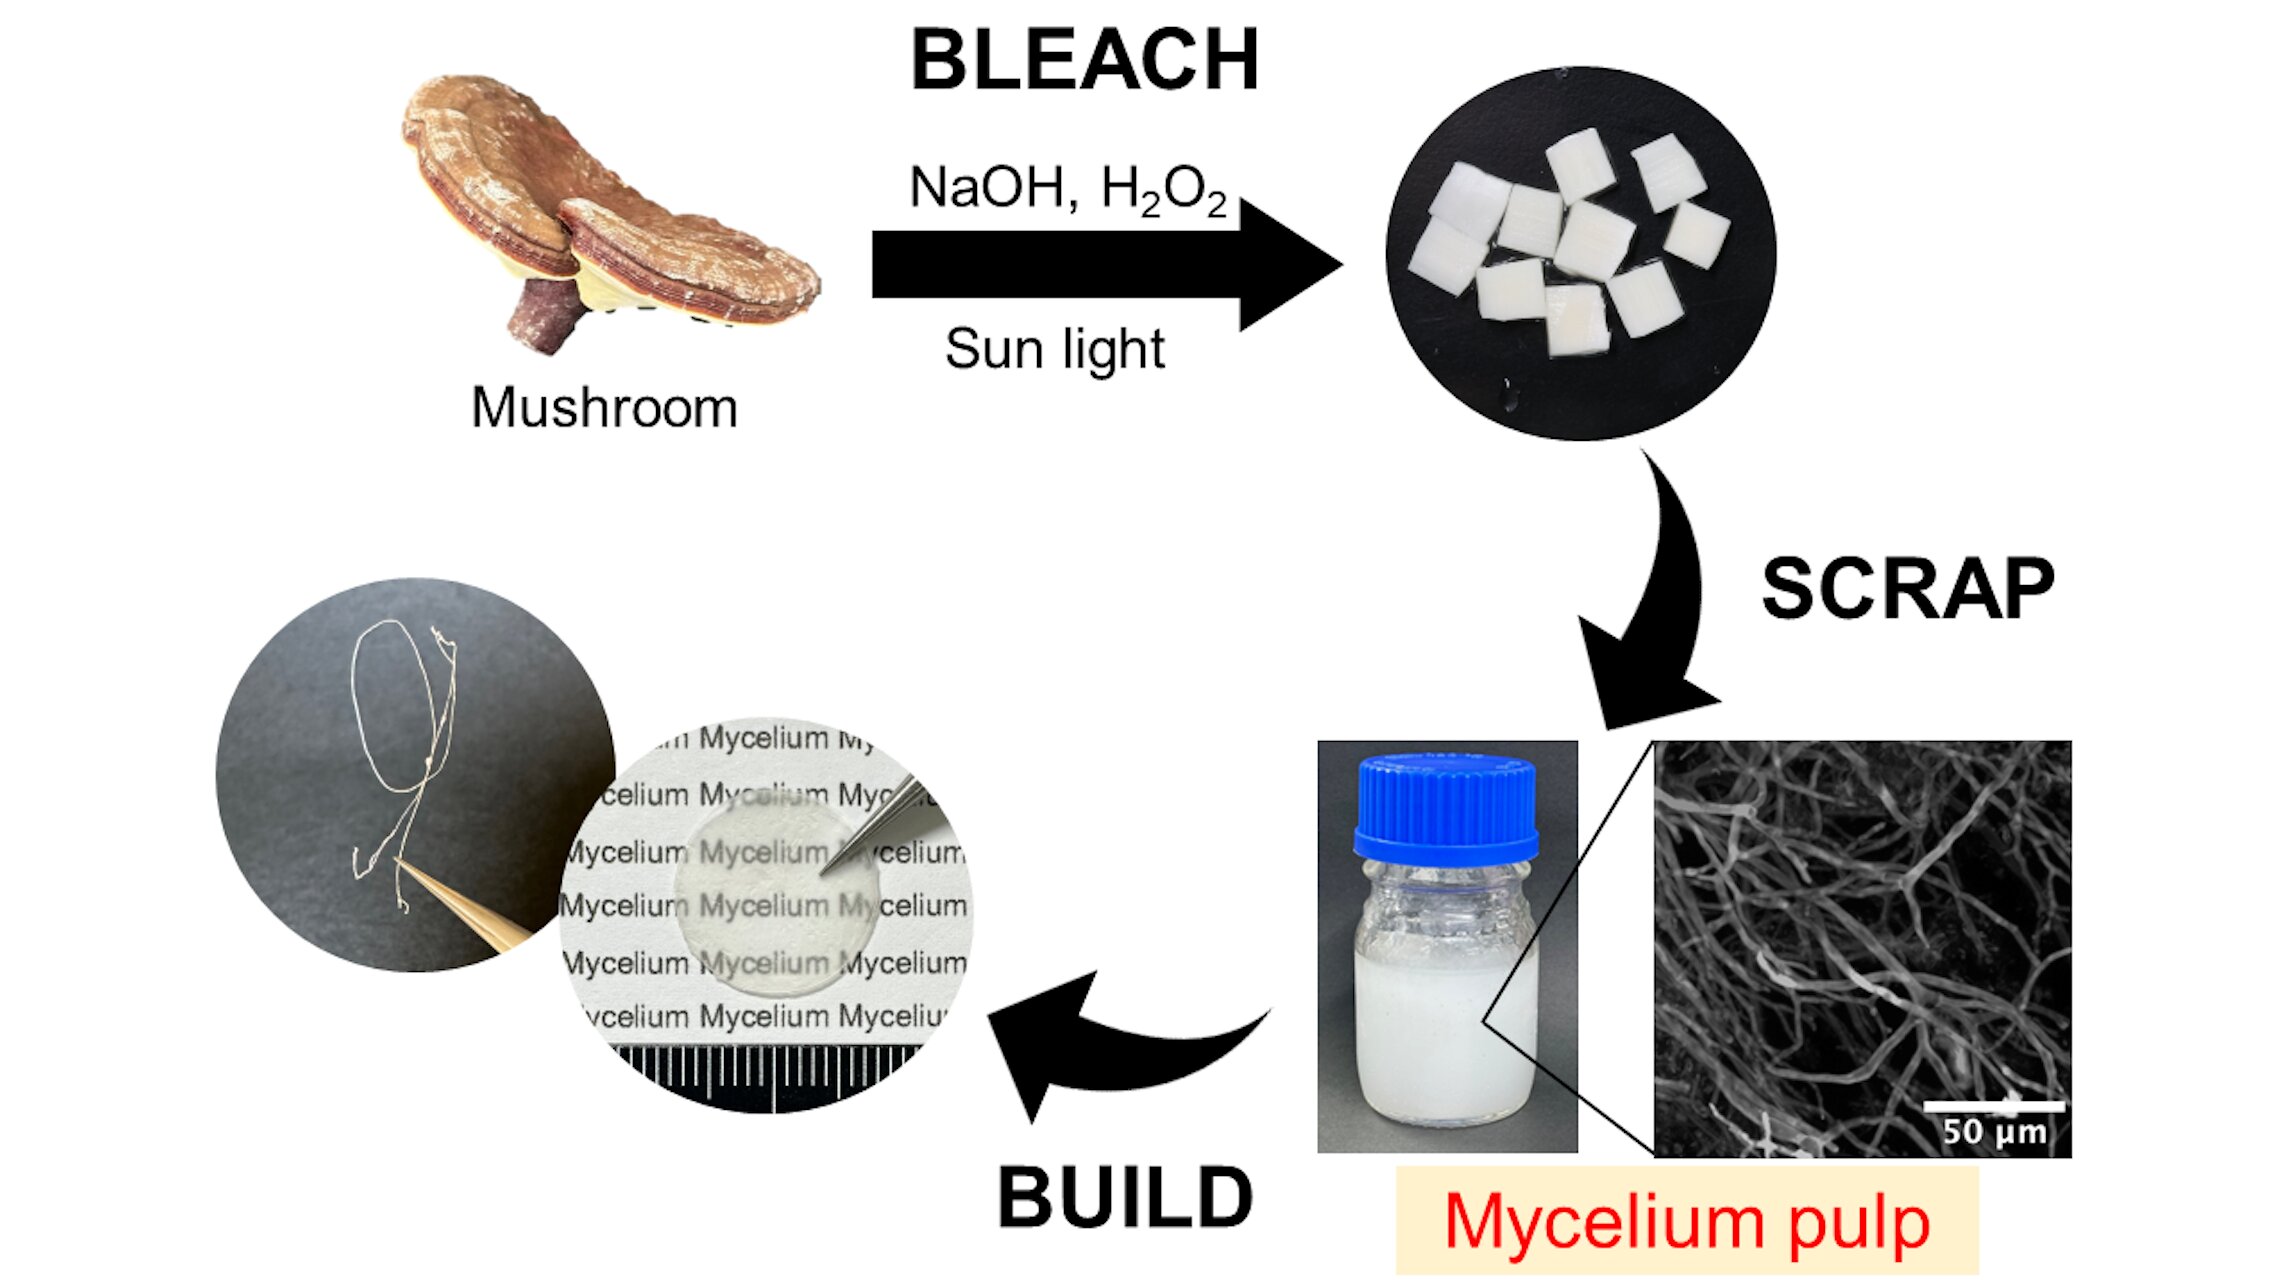 An innovative approach to harvest mycelial fibers for the production of materials derived from mushrooms.